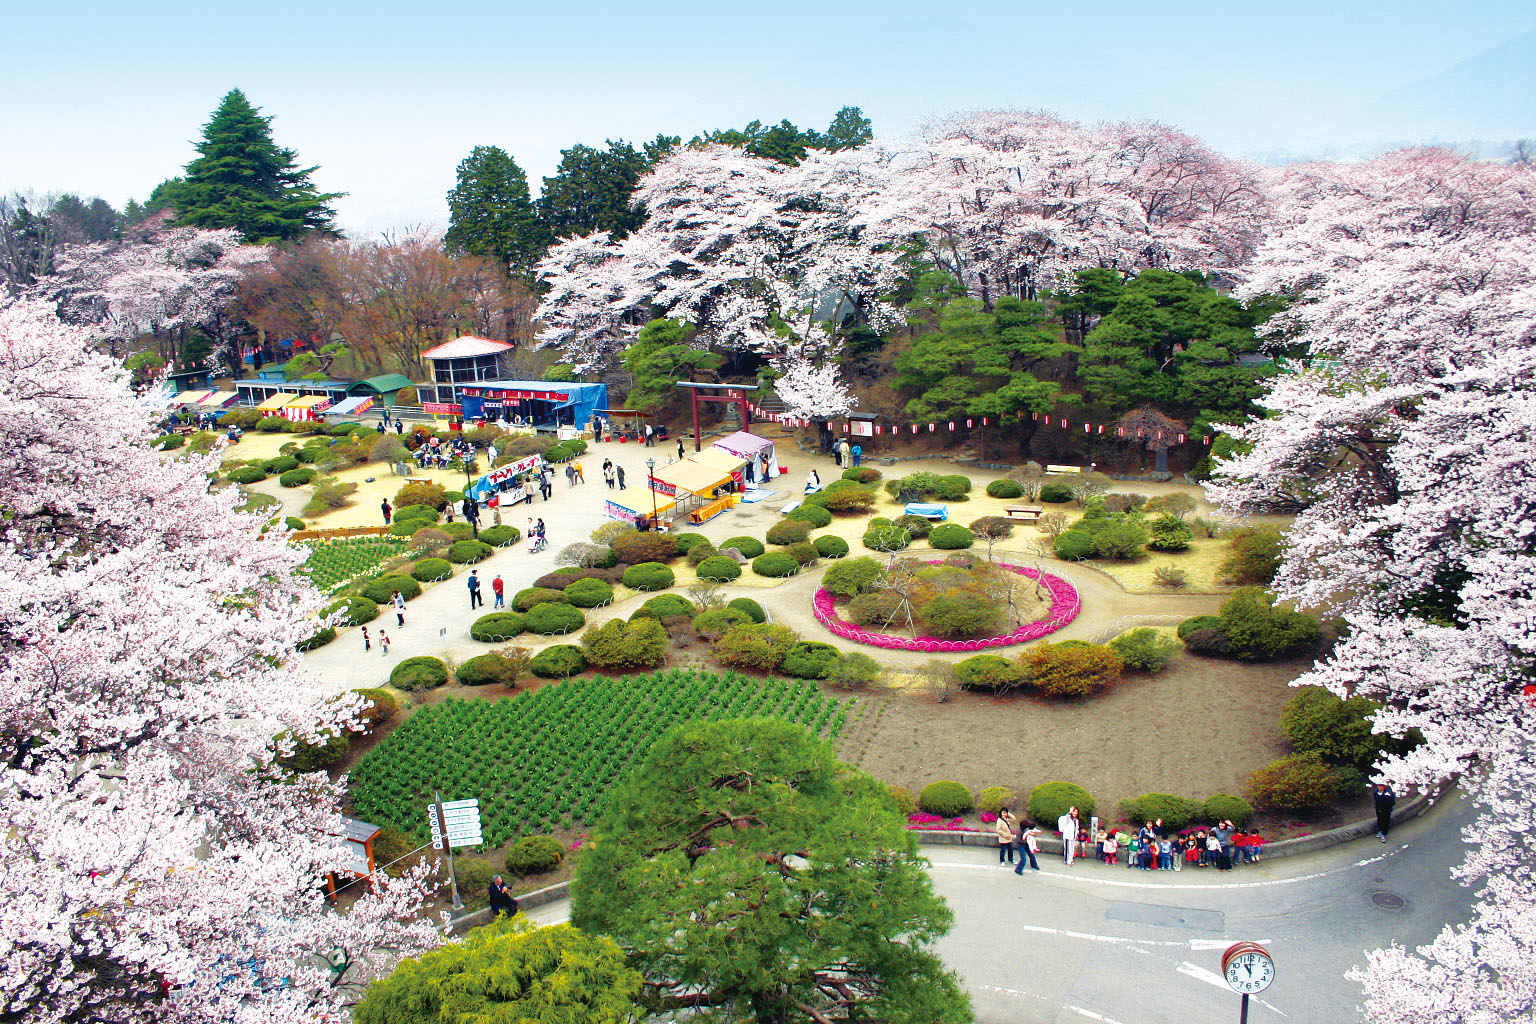 Numata Park are still loved by the beauty of the seasons such as the cherry blossoms in spring.